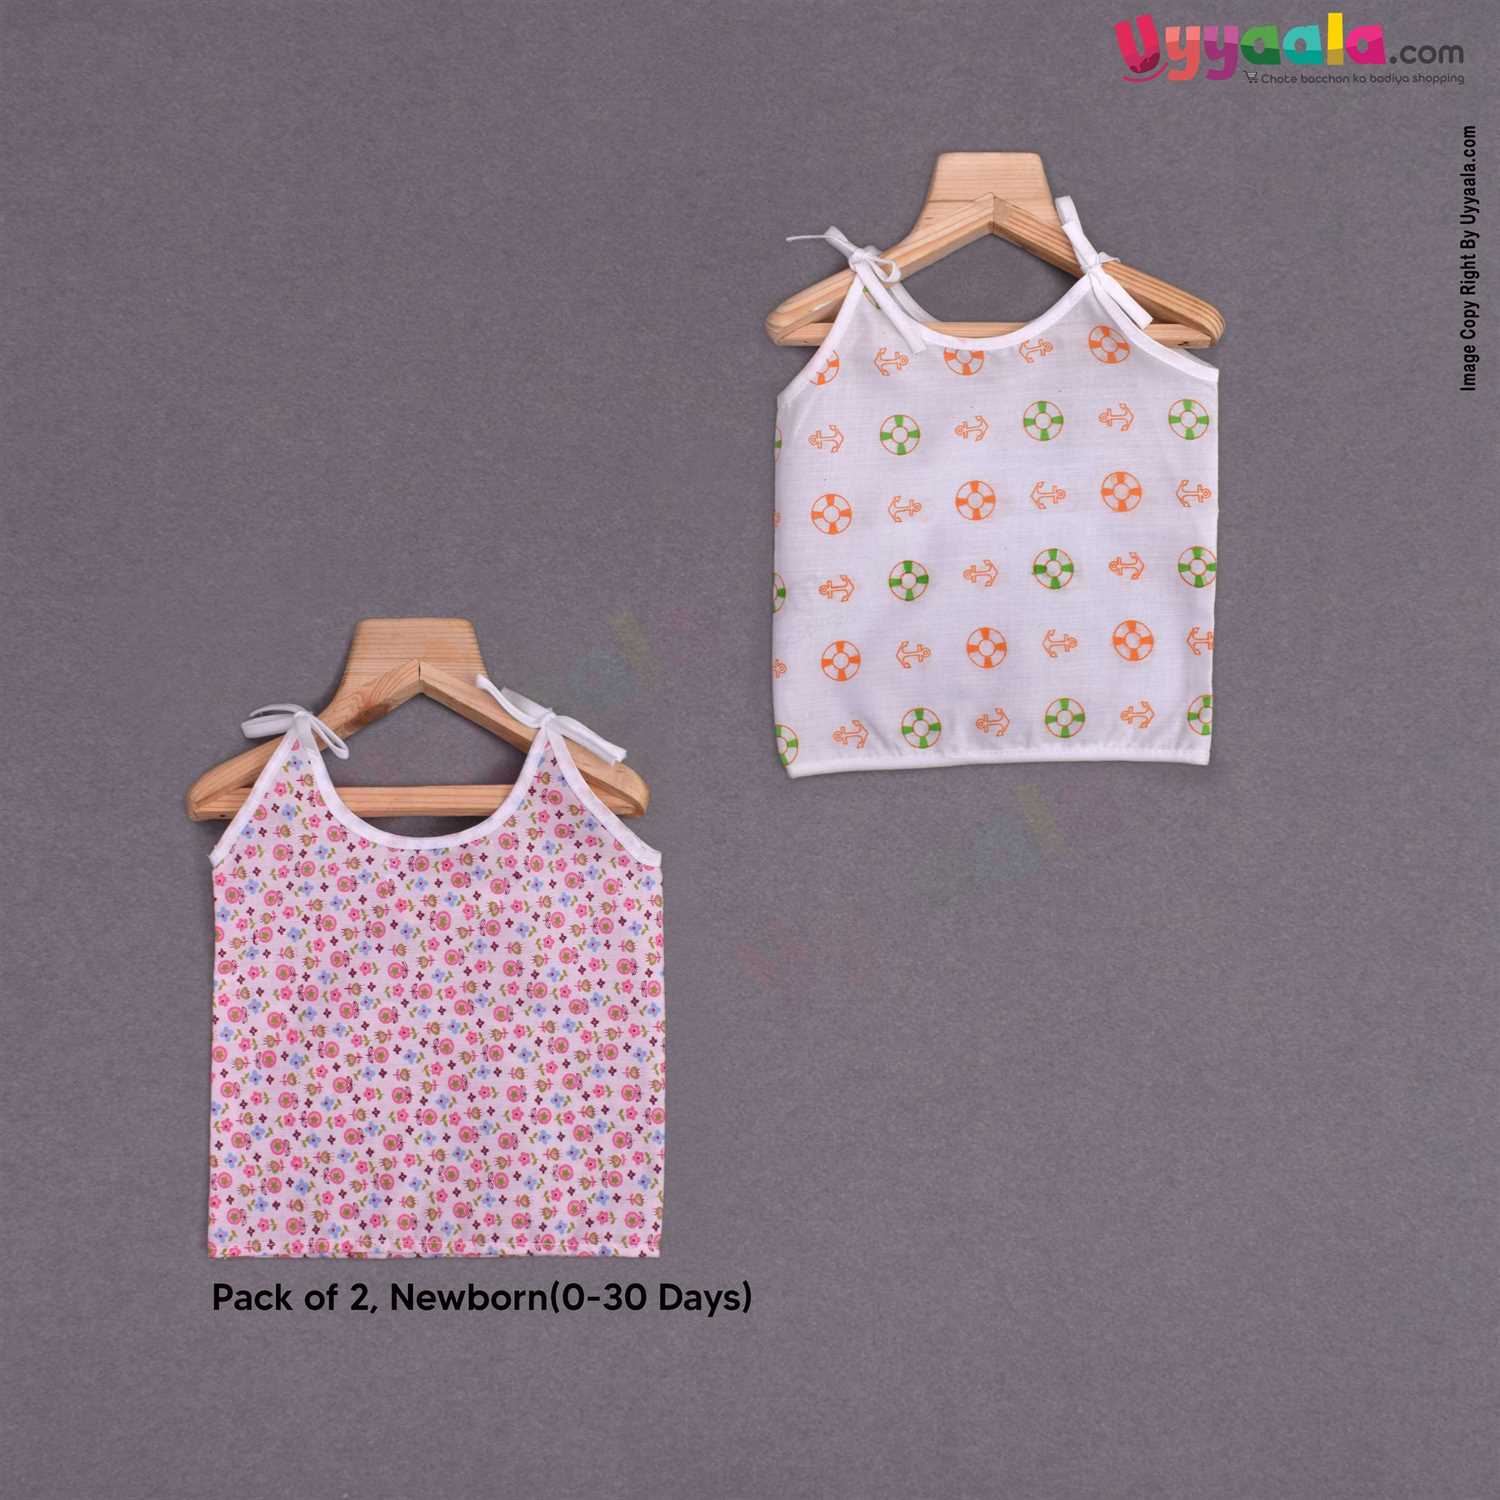 Sleeveless Baby Jabla Set, Top Opening Tie knot Lace Model, (0-30 Days), Floral & Anchor Print, 2Pack - Pink & White